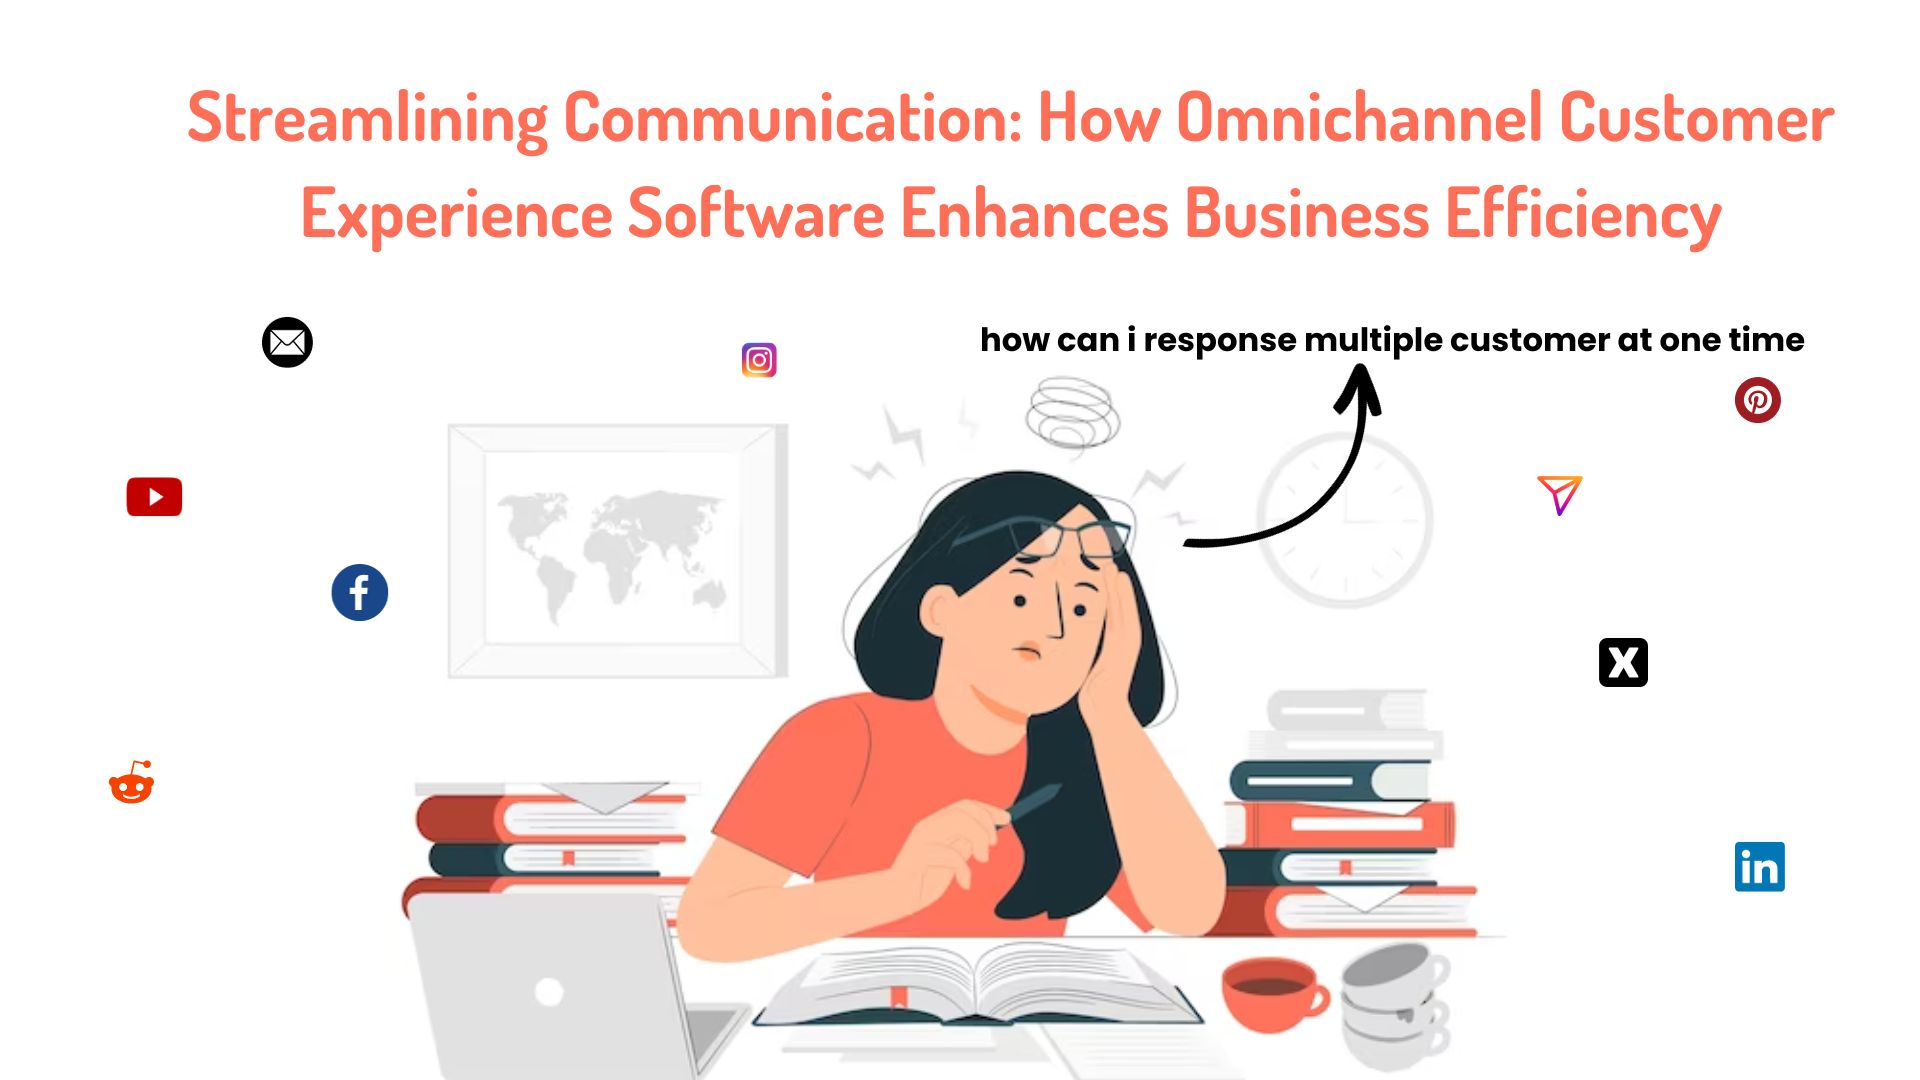  Streamlining Communication: How Omnichannel Customer Experience Software Enhances Business Efficiency 